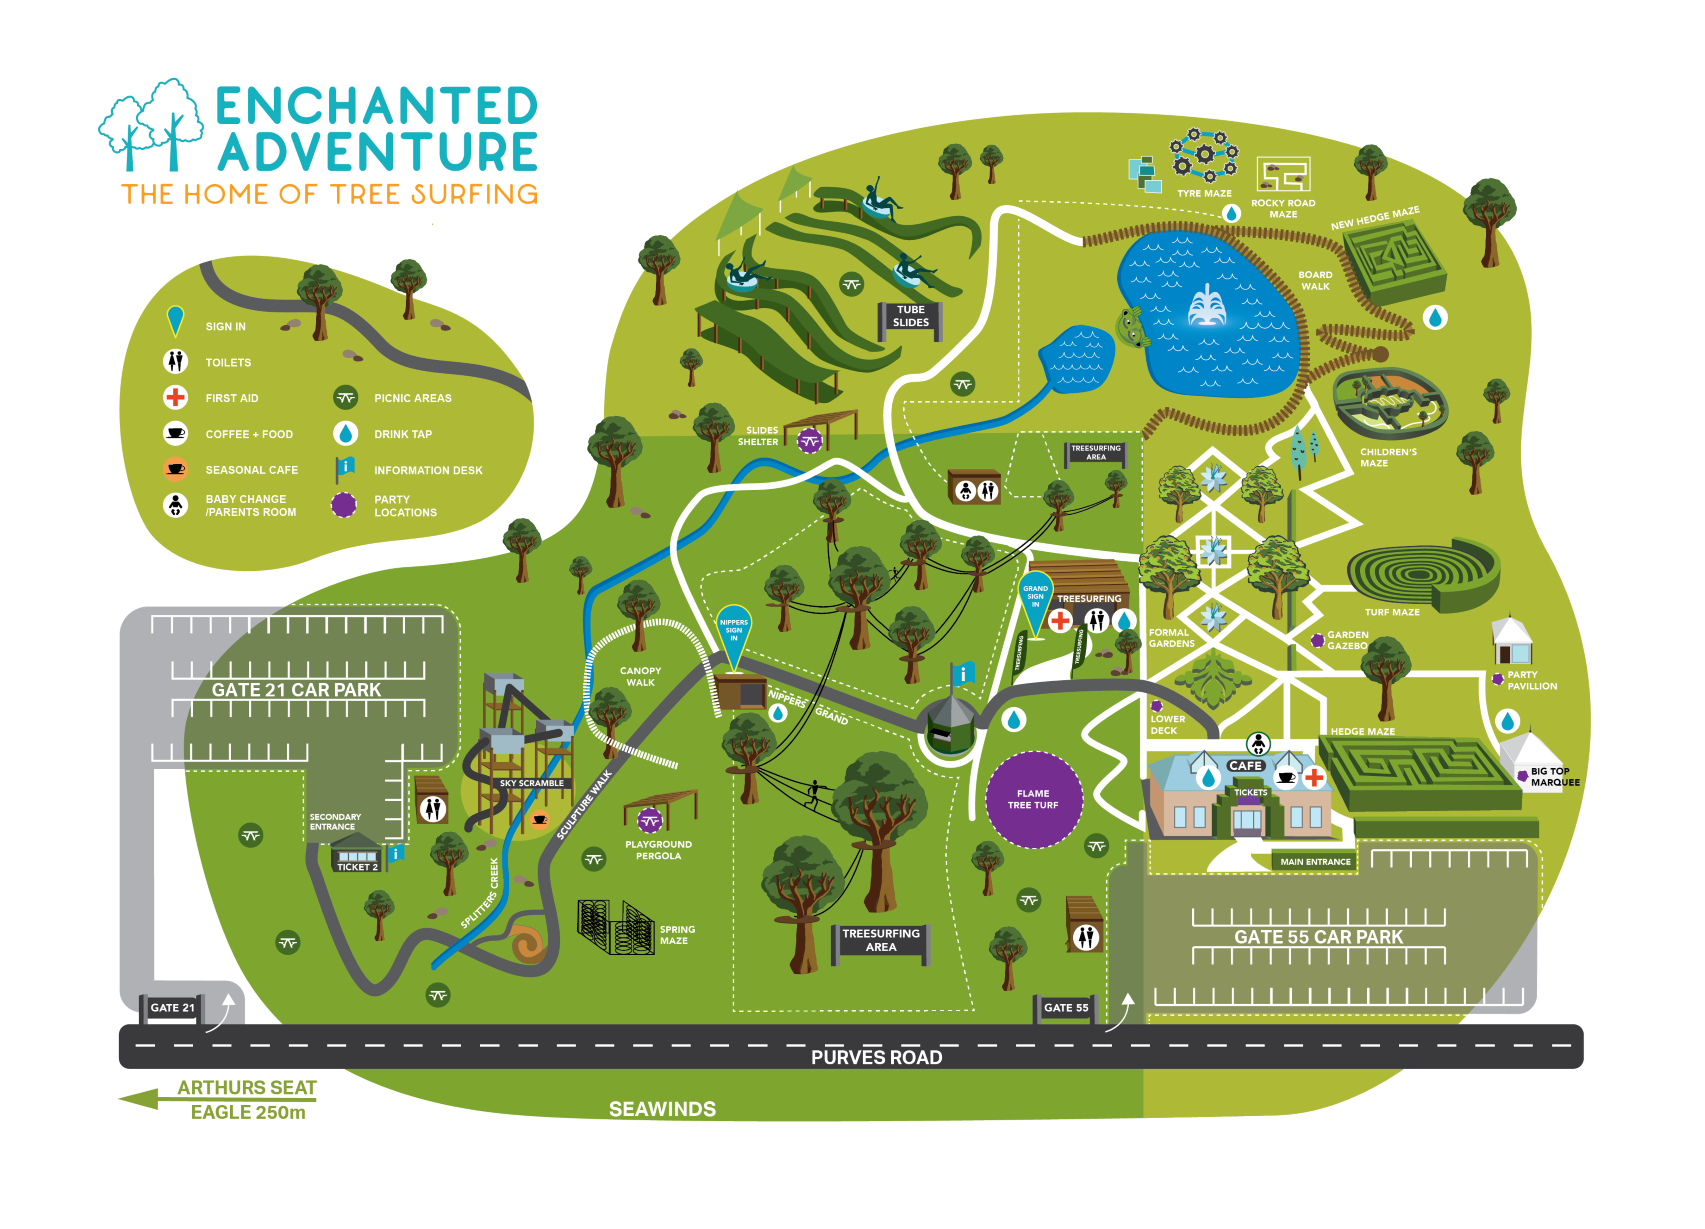 Illustrative map of the Enchanted Adventure and its activities